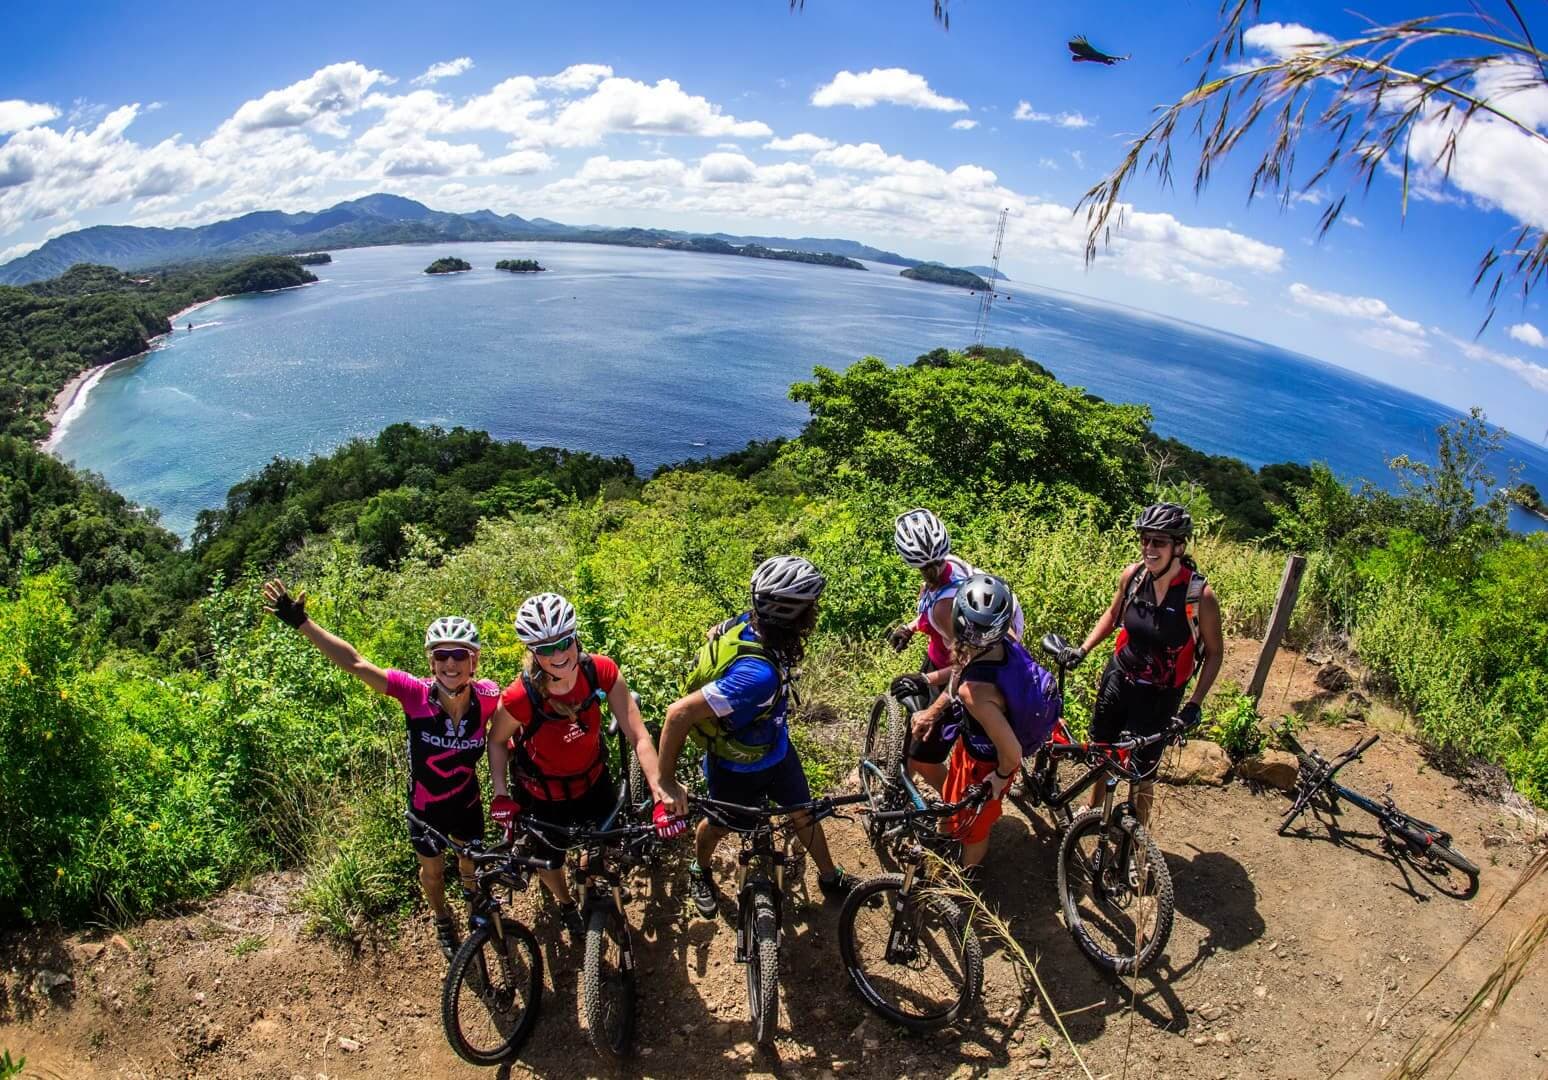 A beautiful picture of cycling in Trincomalee Sri Lanka